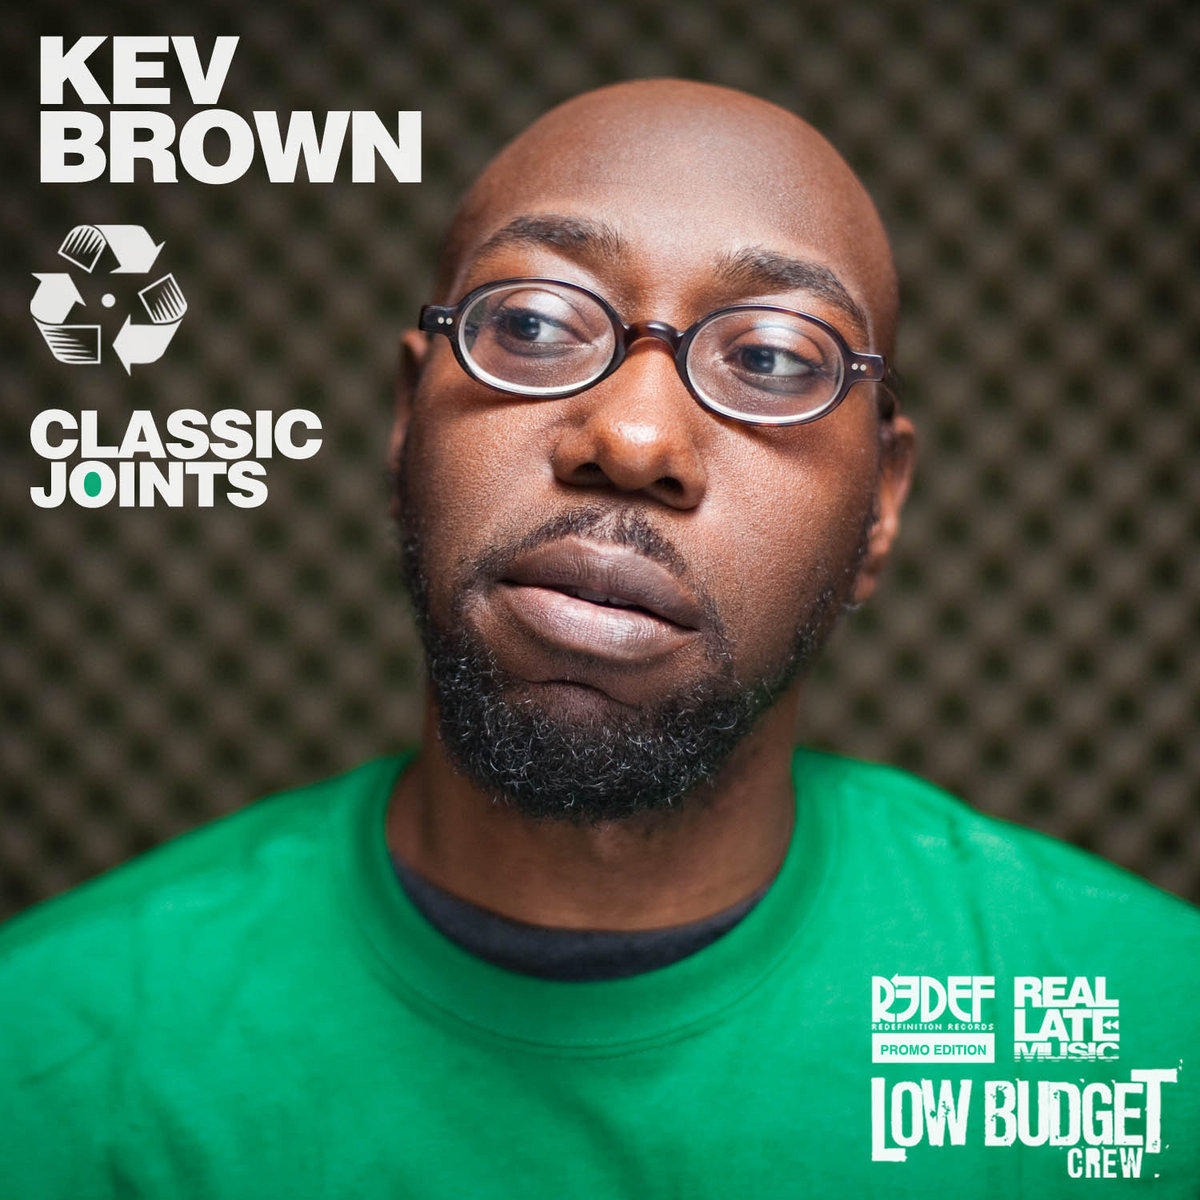 Brown songs. Kev Brown. Kev Brown - Random Joints. Браун Классик альбом. Kev Brown i do what i do.